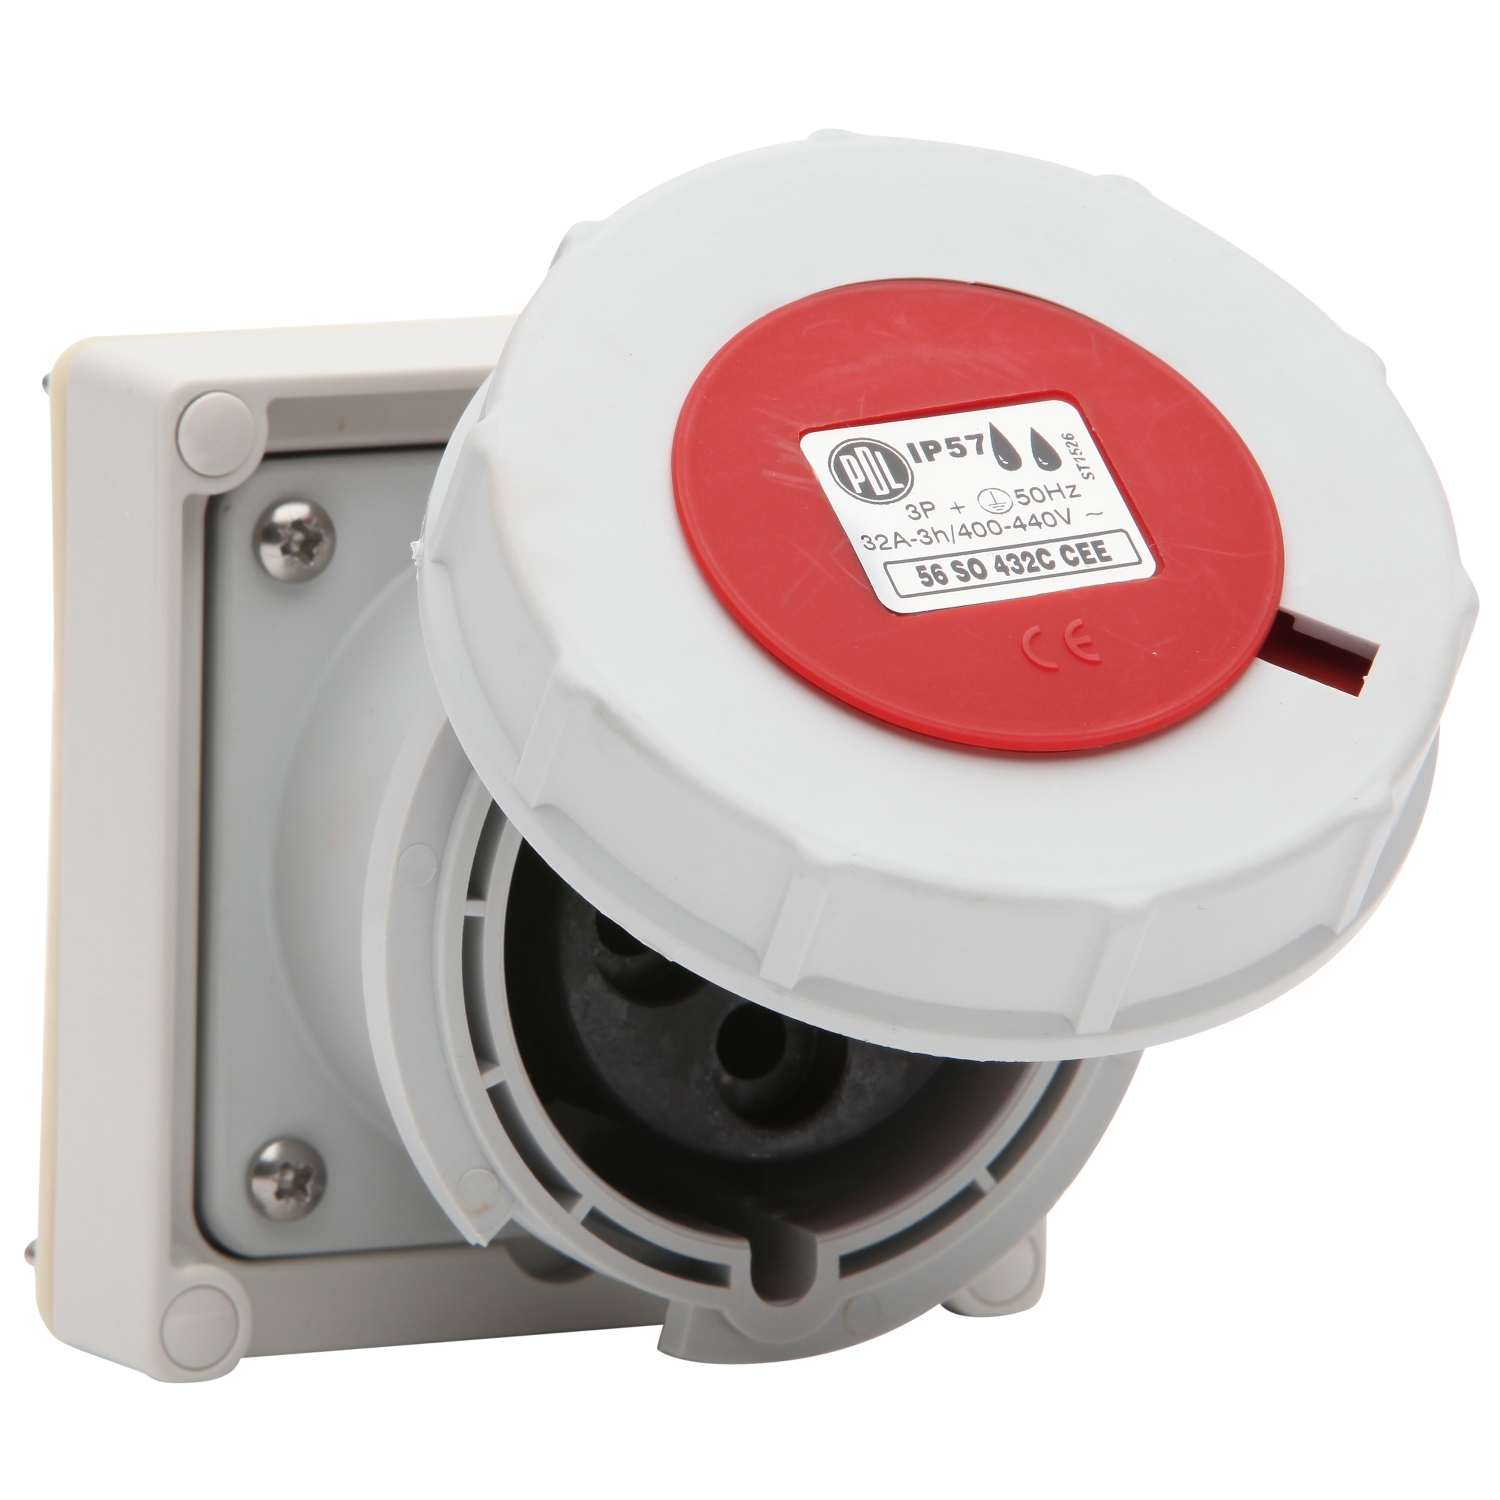 PDL 56 Series - Socket CEE 32A 400V 3-Phase 4-Round Pin IP57 - Grey Red